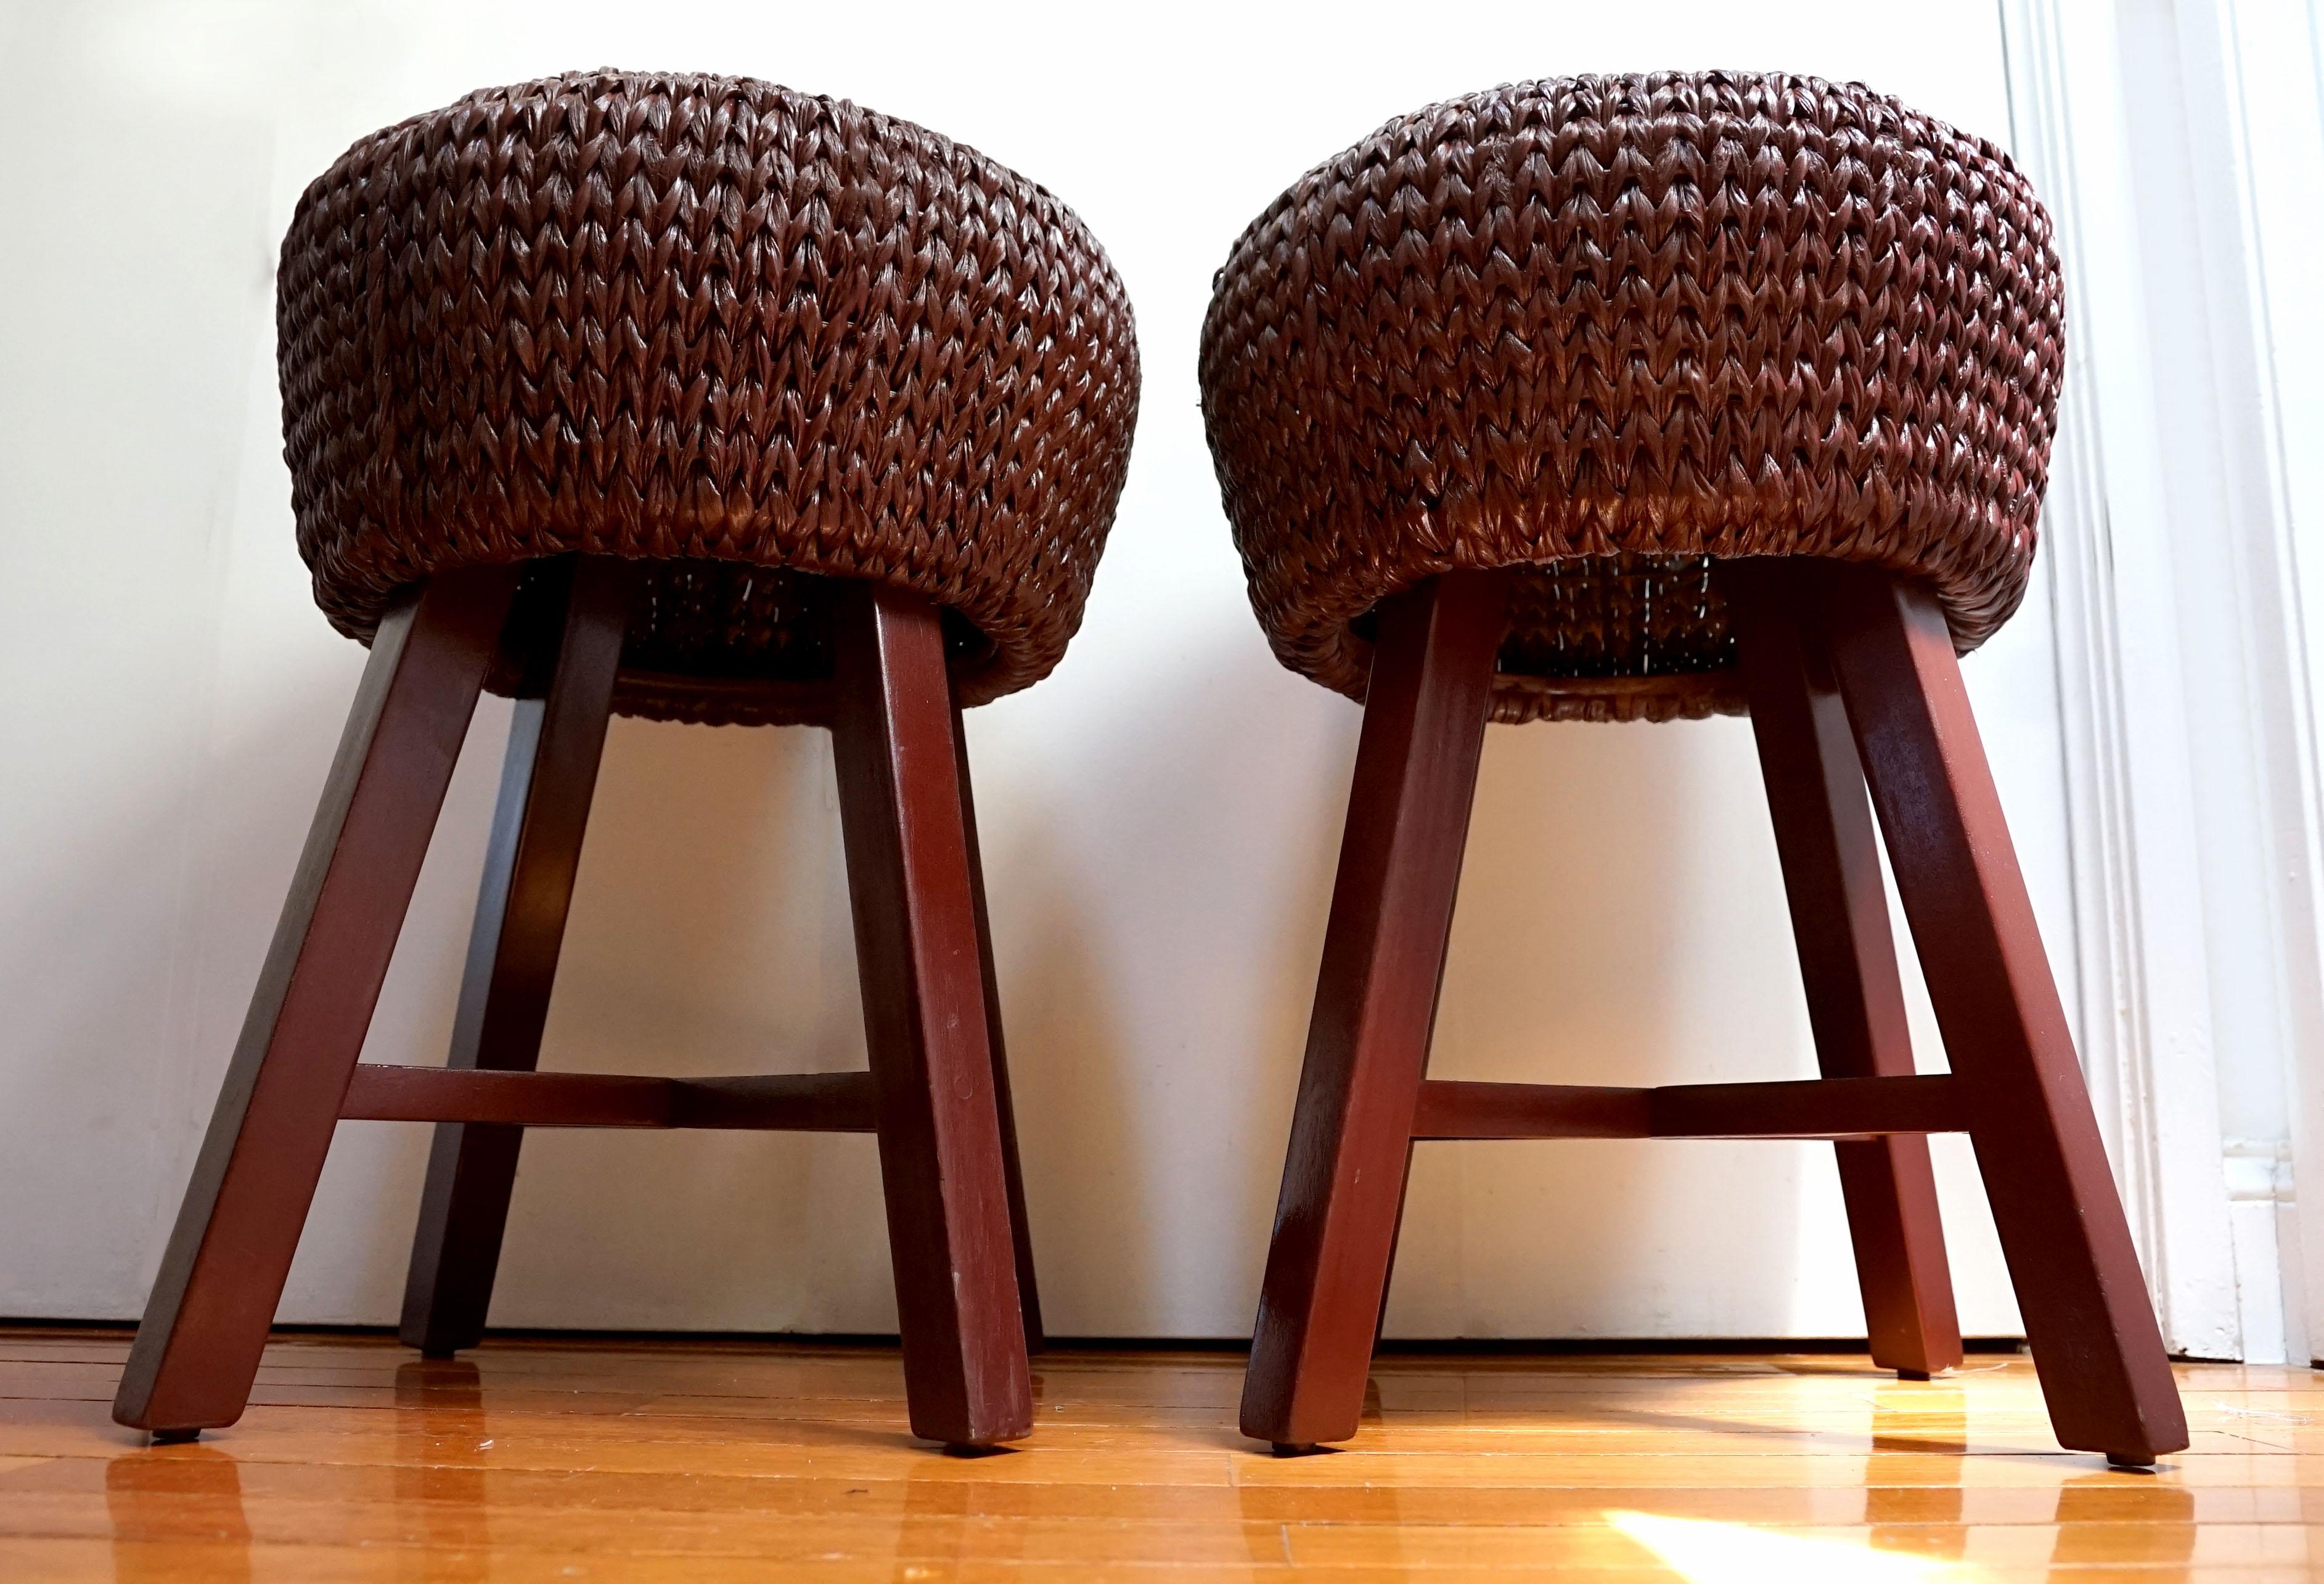 This pair of Palacek bar stools is smashing in deep chocolate leather with a painted finish. The pieces have been reimagined and reupholstered from their vintage gray leather and tan rattan to this chic seating option, almost like new.  The